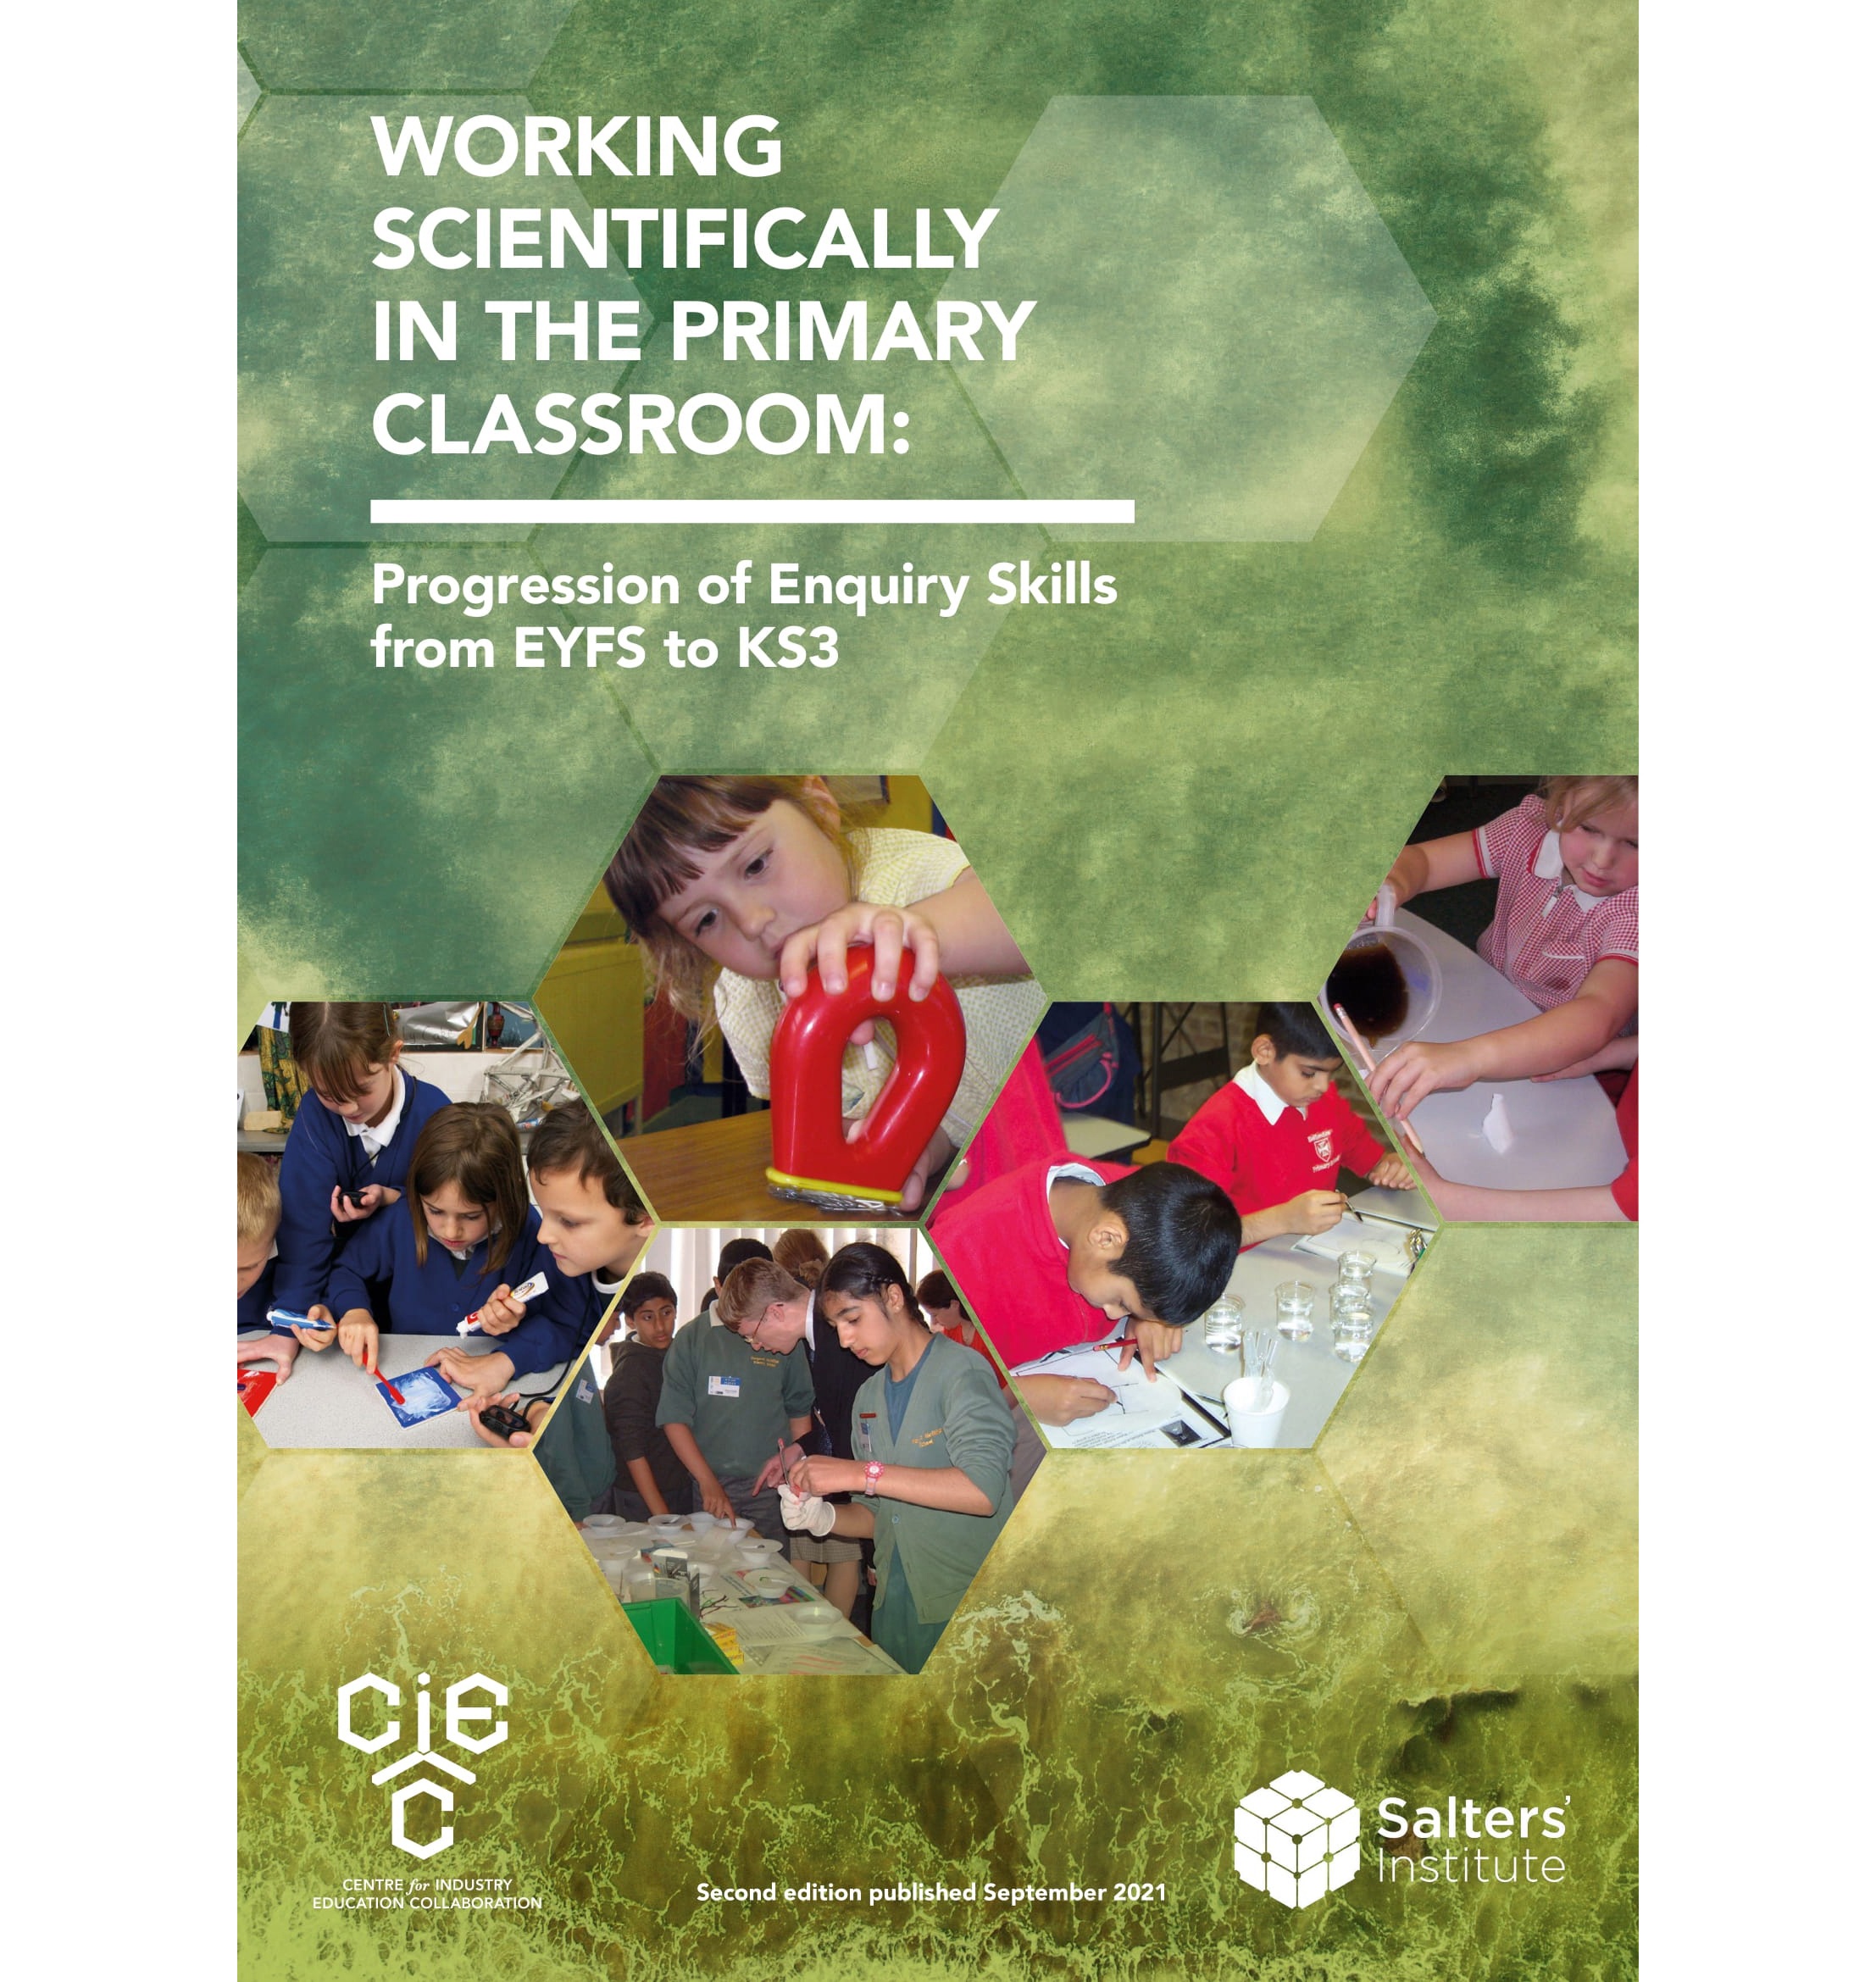 Working Scientifically in the Primary Classroom cover